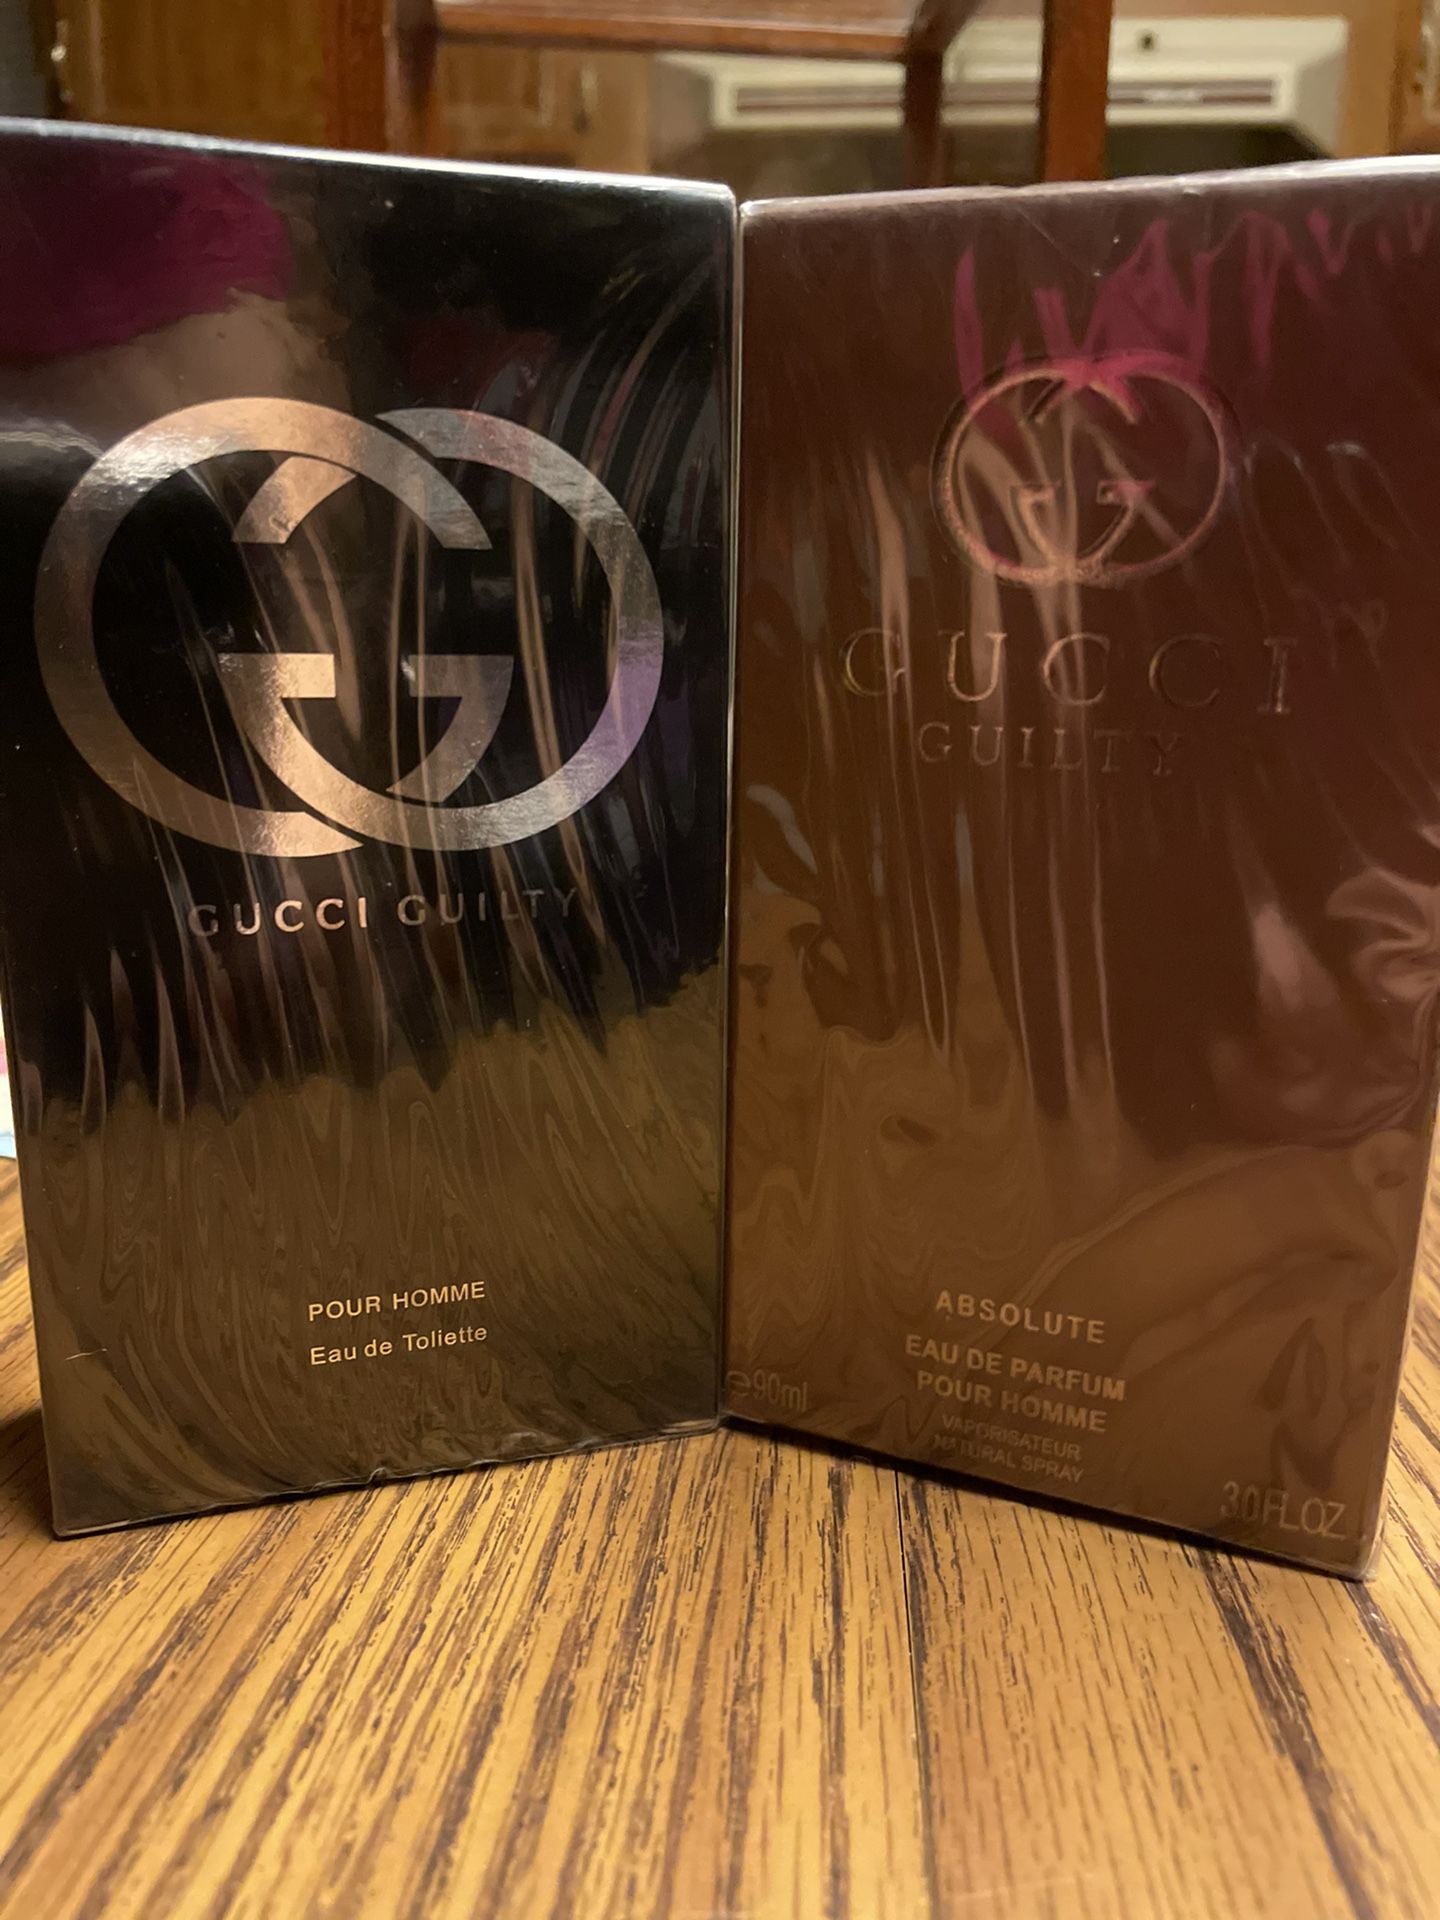 Men’s Name-brand Colognes Blue Polo, Sauvage, Armanni Aqua Di, Gucci Guilty  New/Sealed  $85 Each ... buy 2 for a discount 